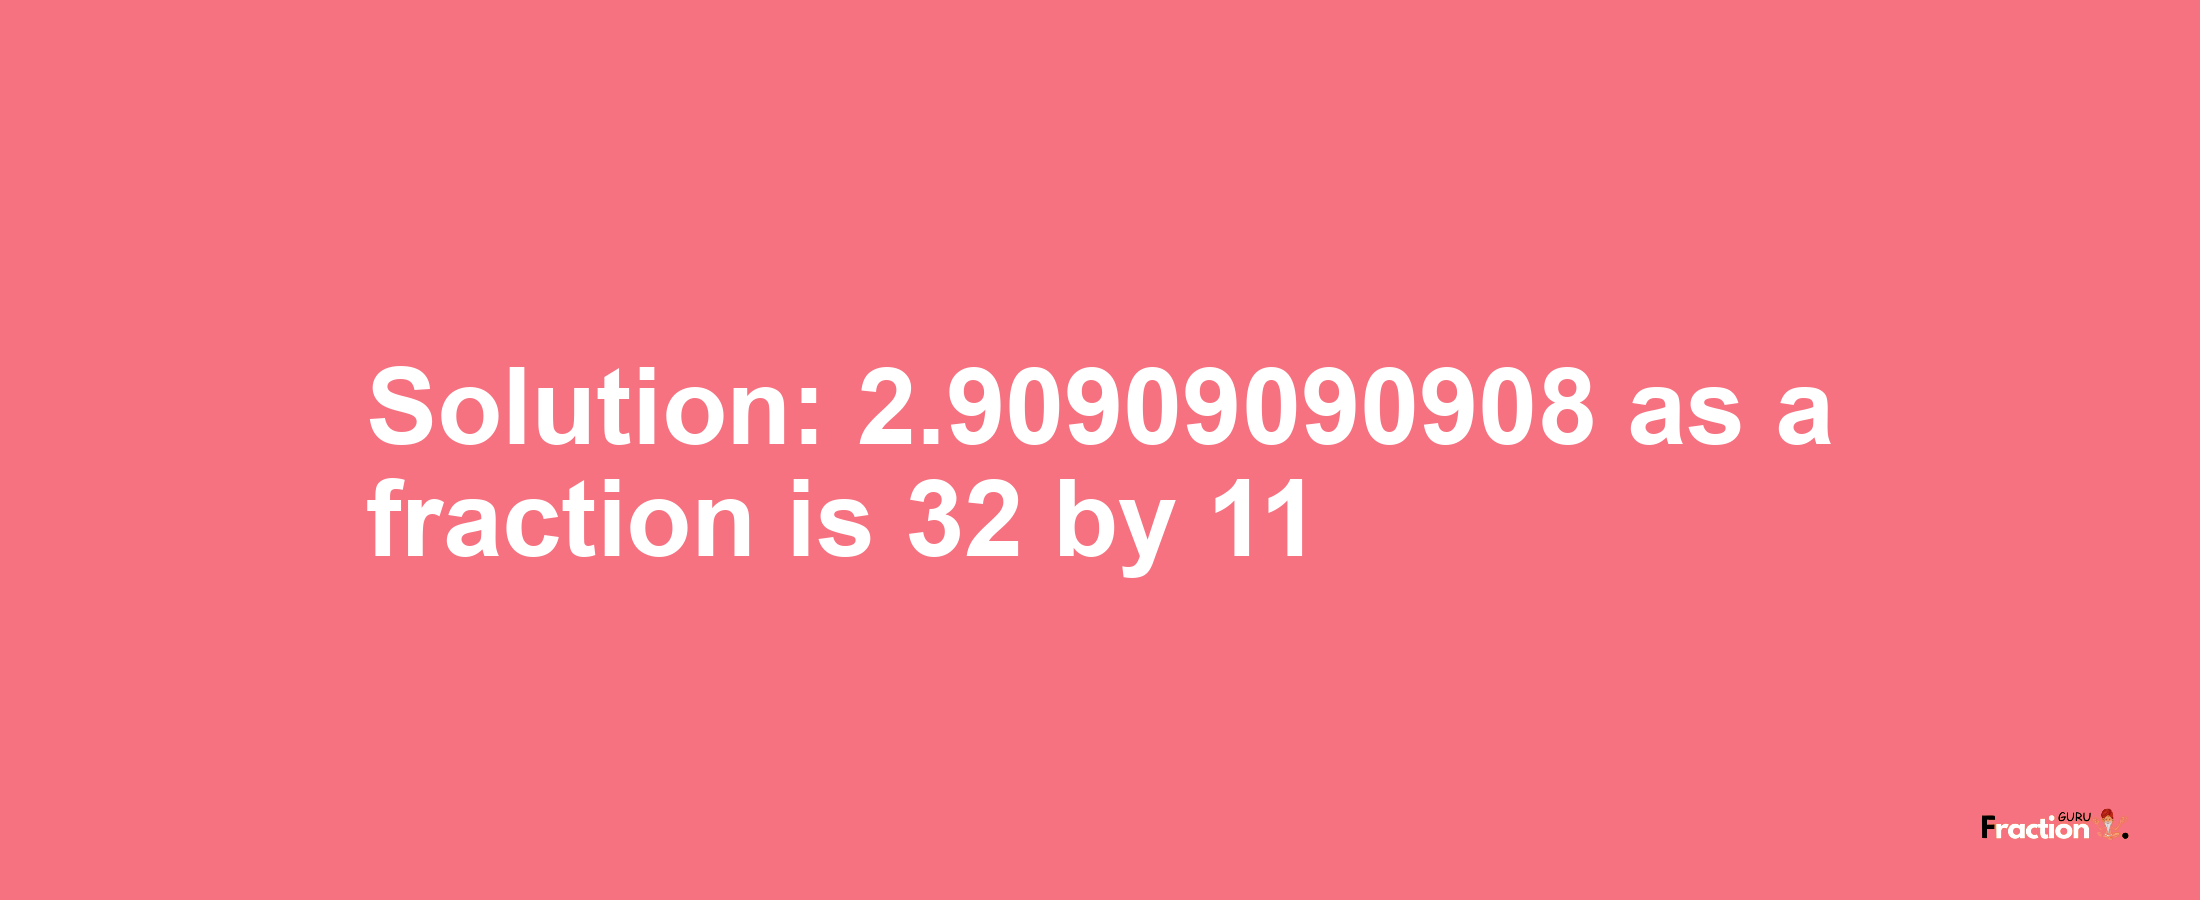 Solution:2.90909090908 as a fraction is 32/11